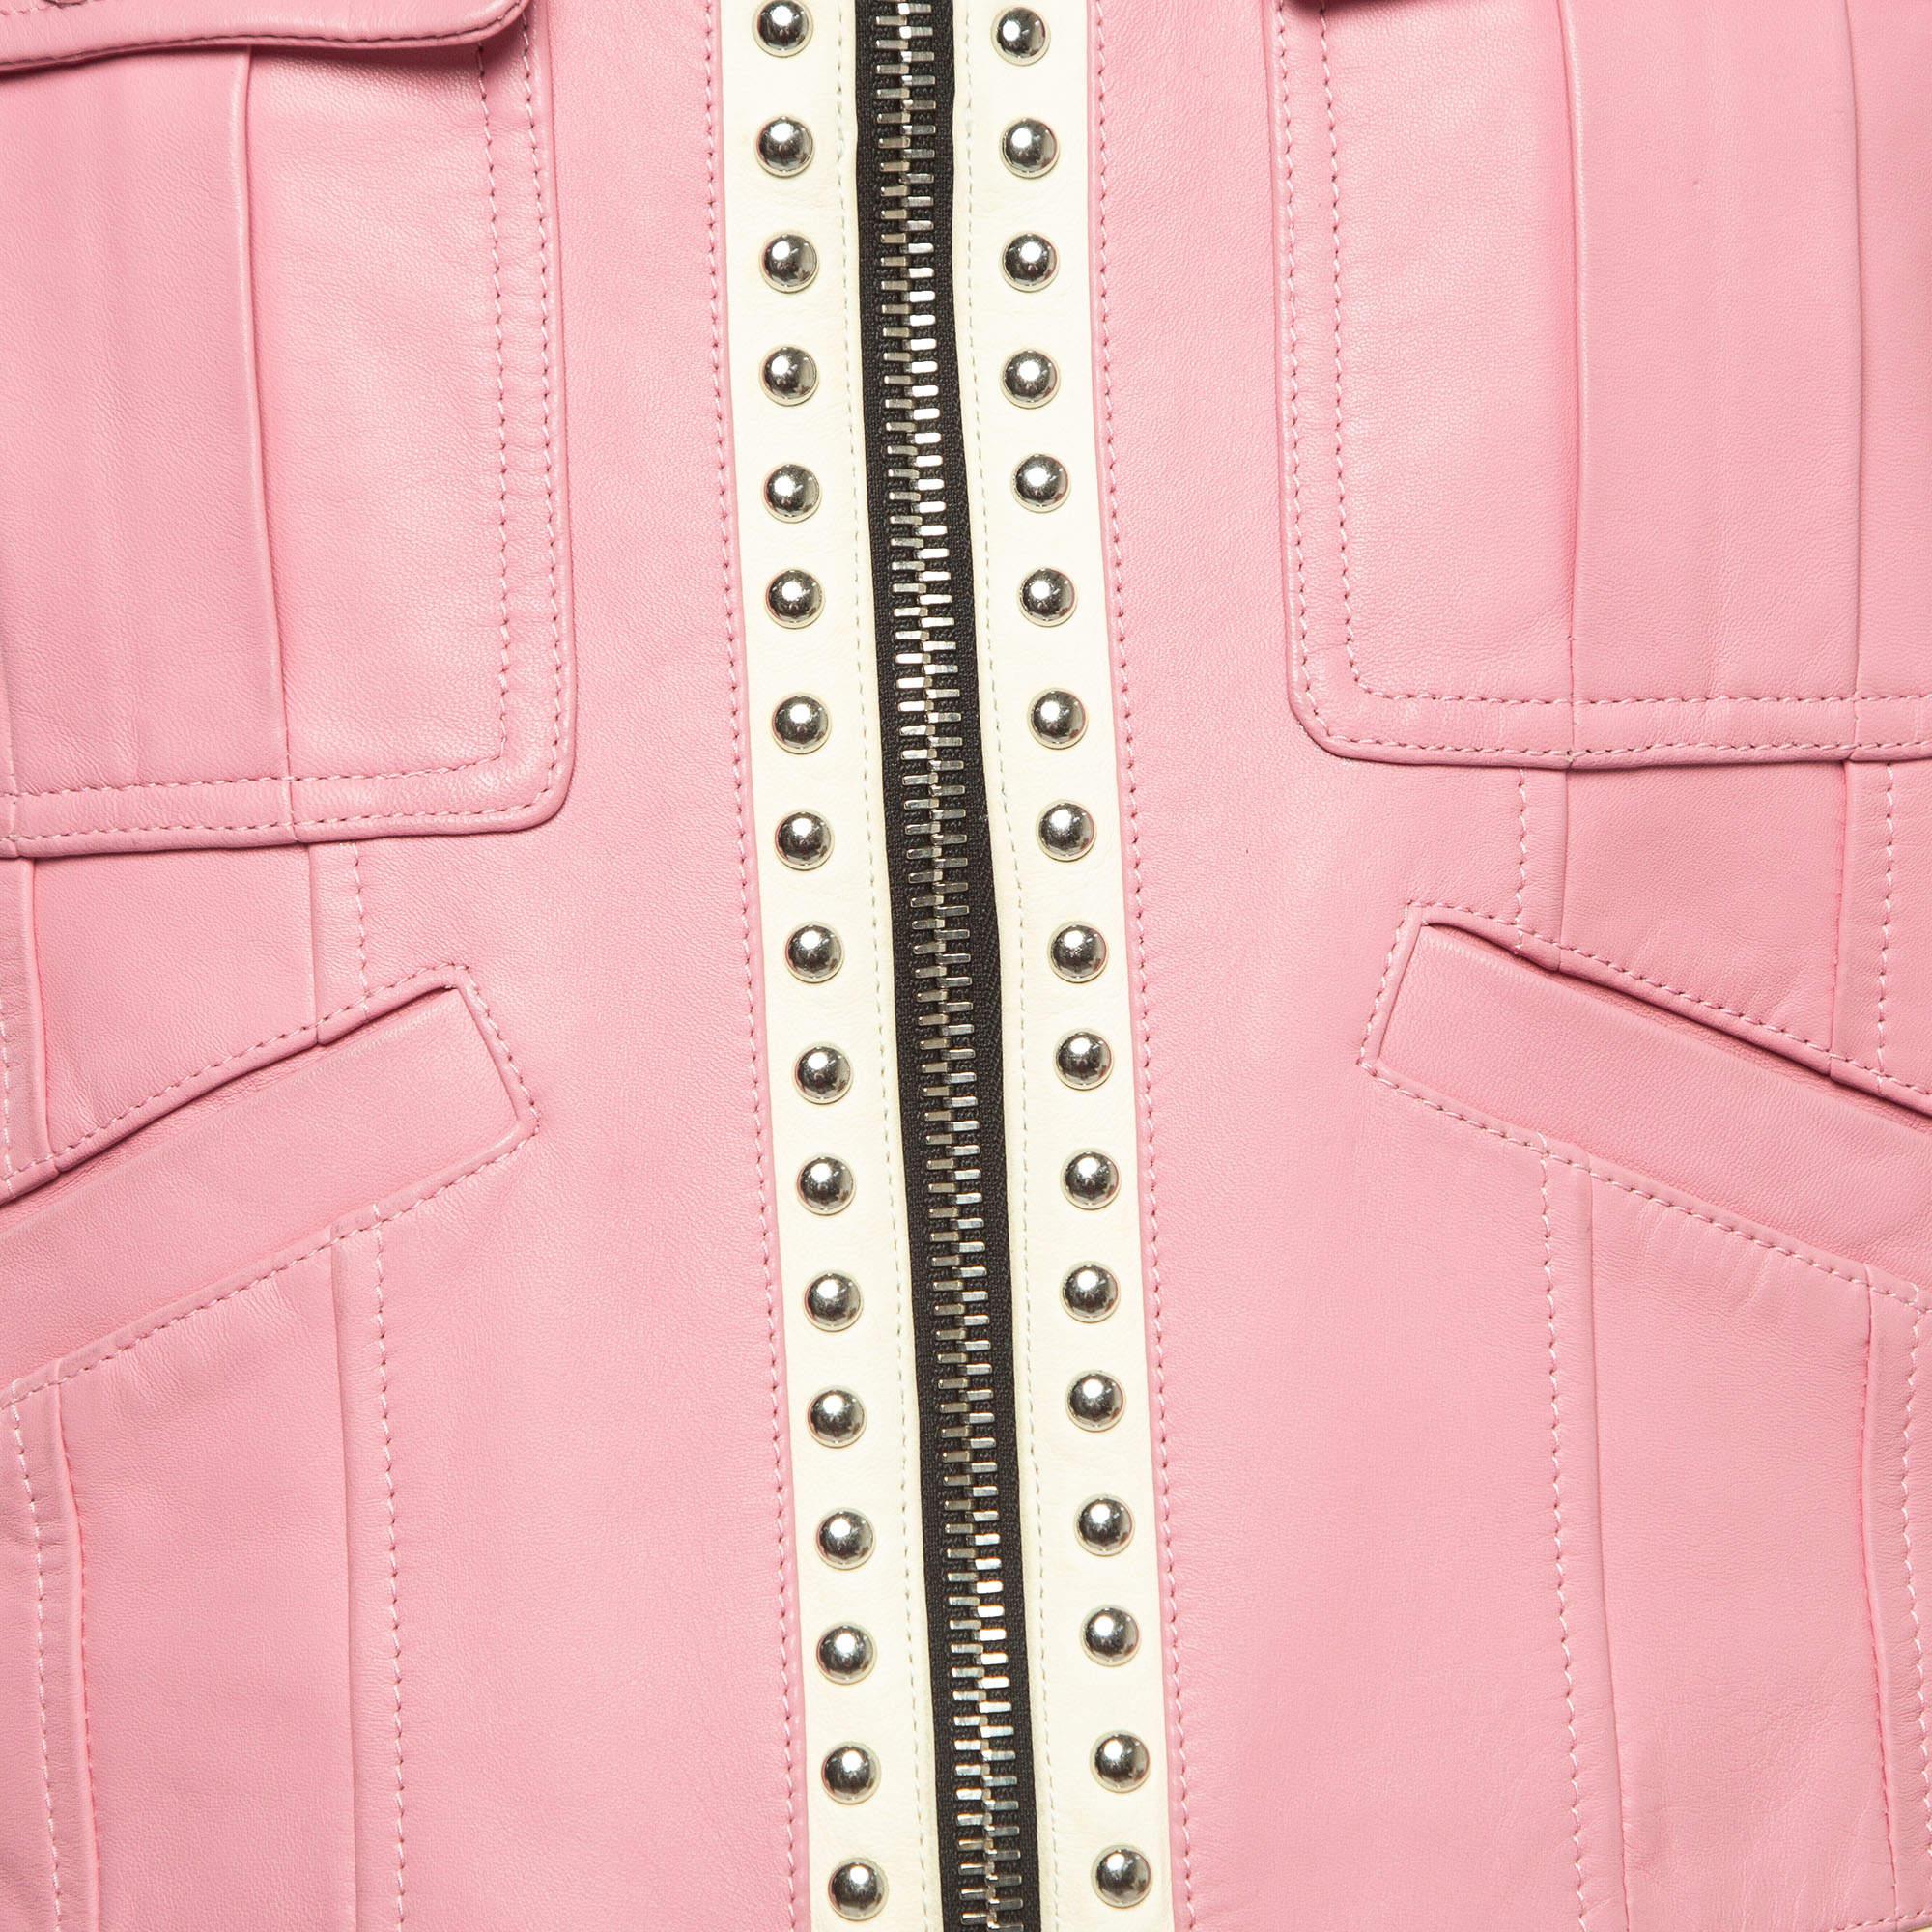 Dsquared2 Pink Colorblocked Leather Studded Jacket M In Excellent Condition For Sale In Dubai, Al Qouz 2